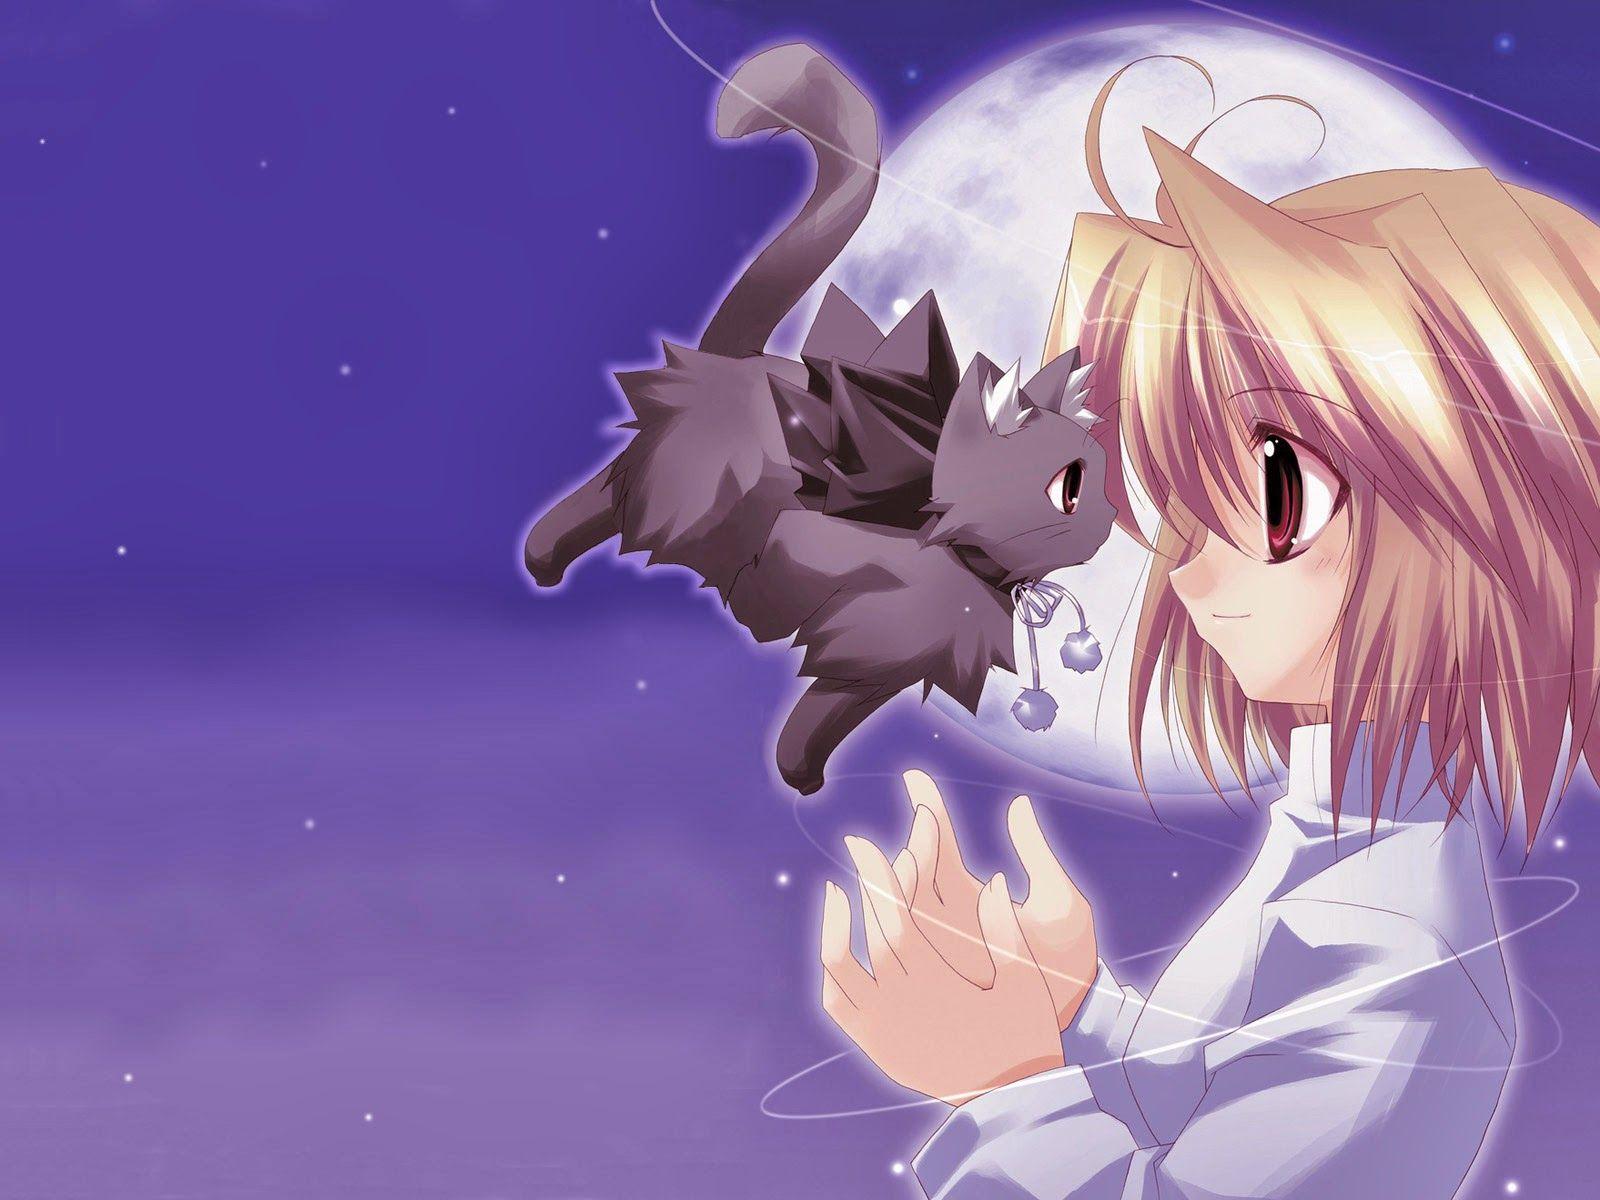 Live wallpaper Anime cat girl DOWNLOAD FREE (1746974393)